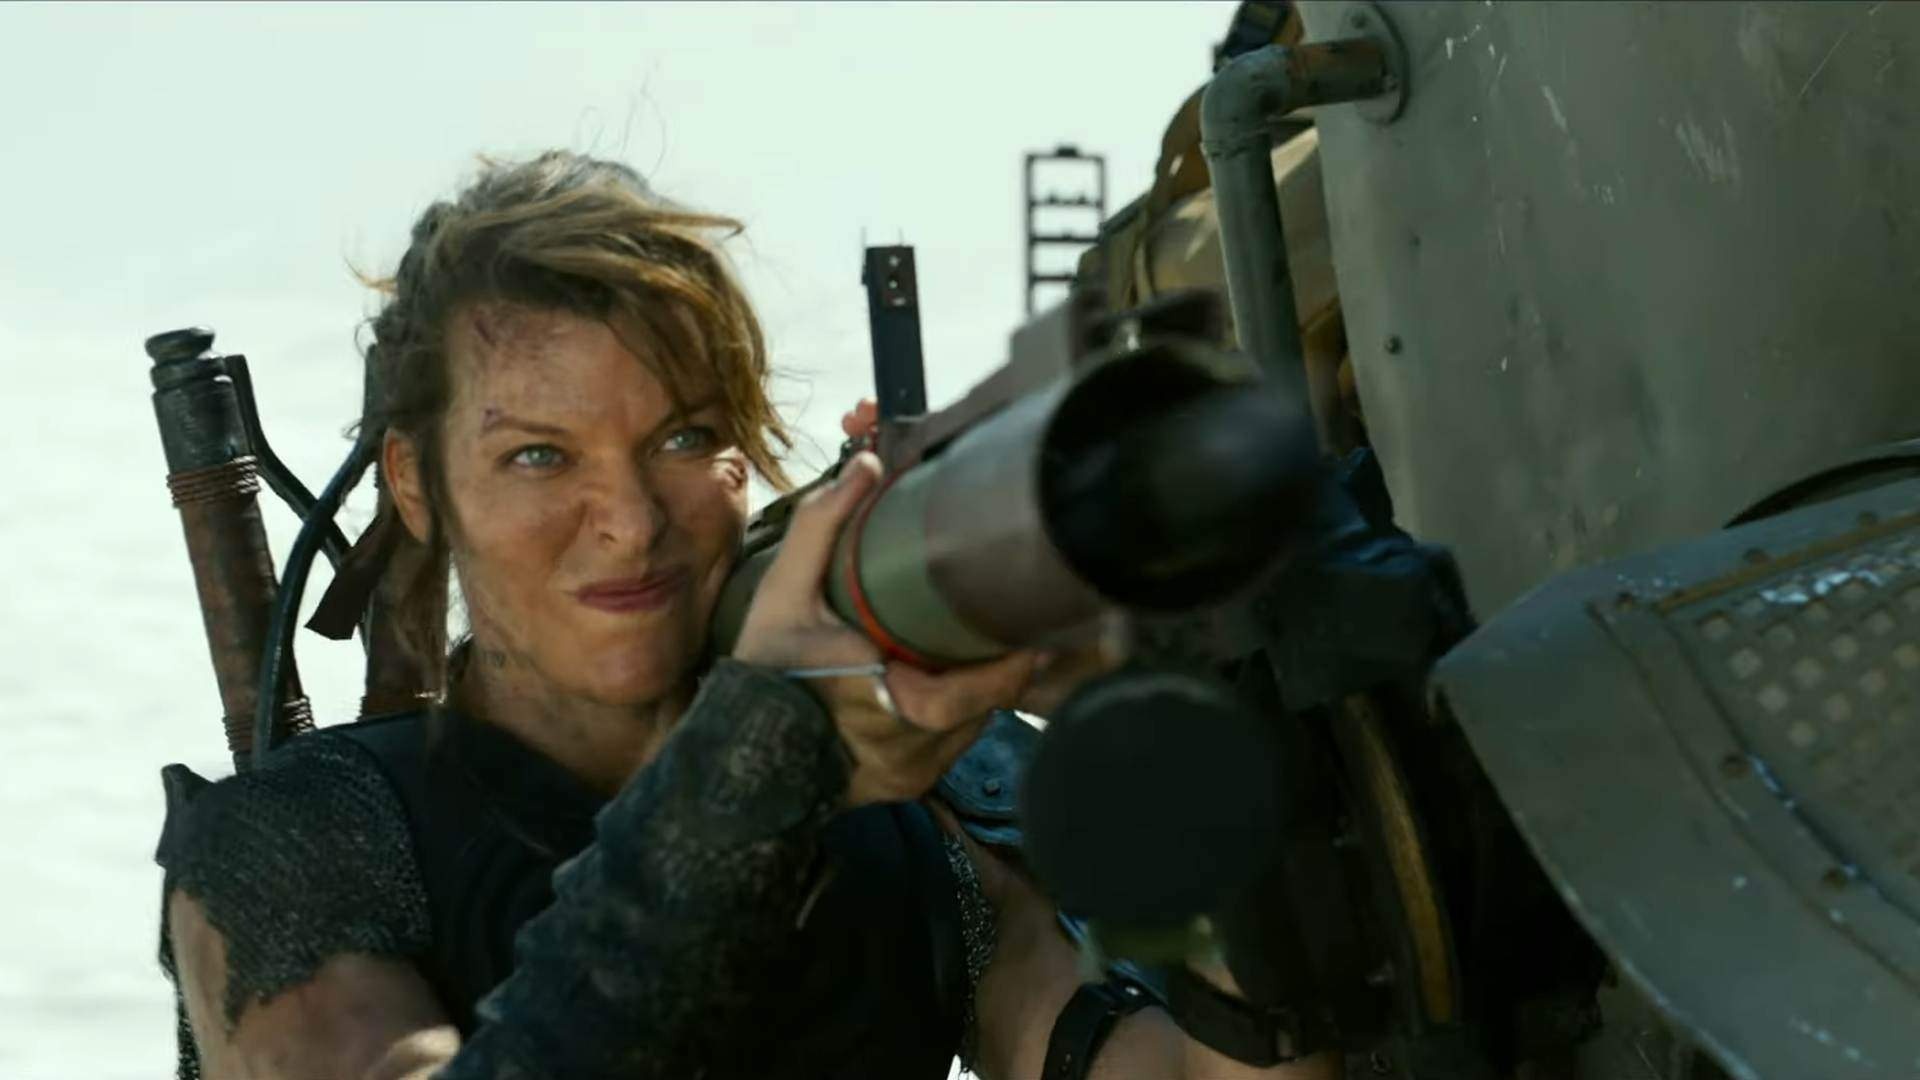 Monster Hunter: Epic Milla Jovovich adaptation, An action movie based on the video game. 1920x1080 Full HD Background.